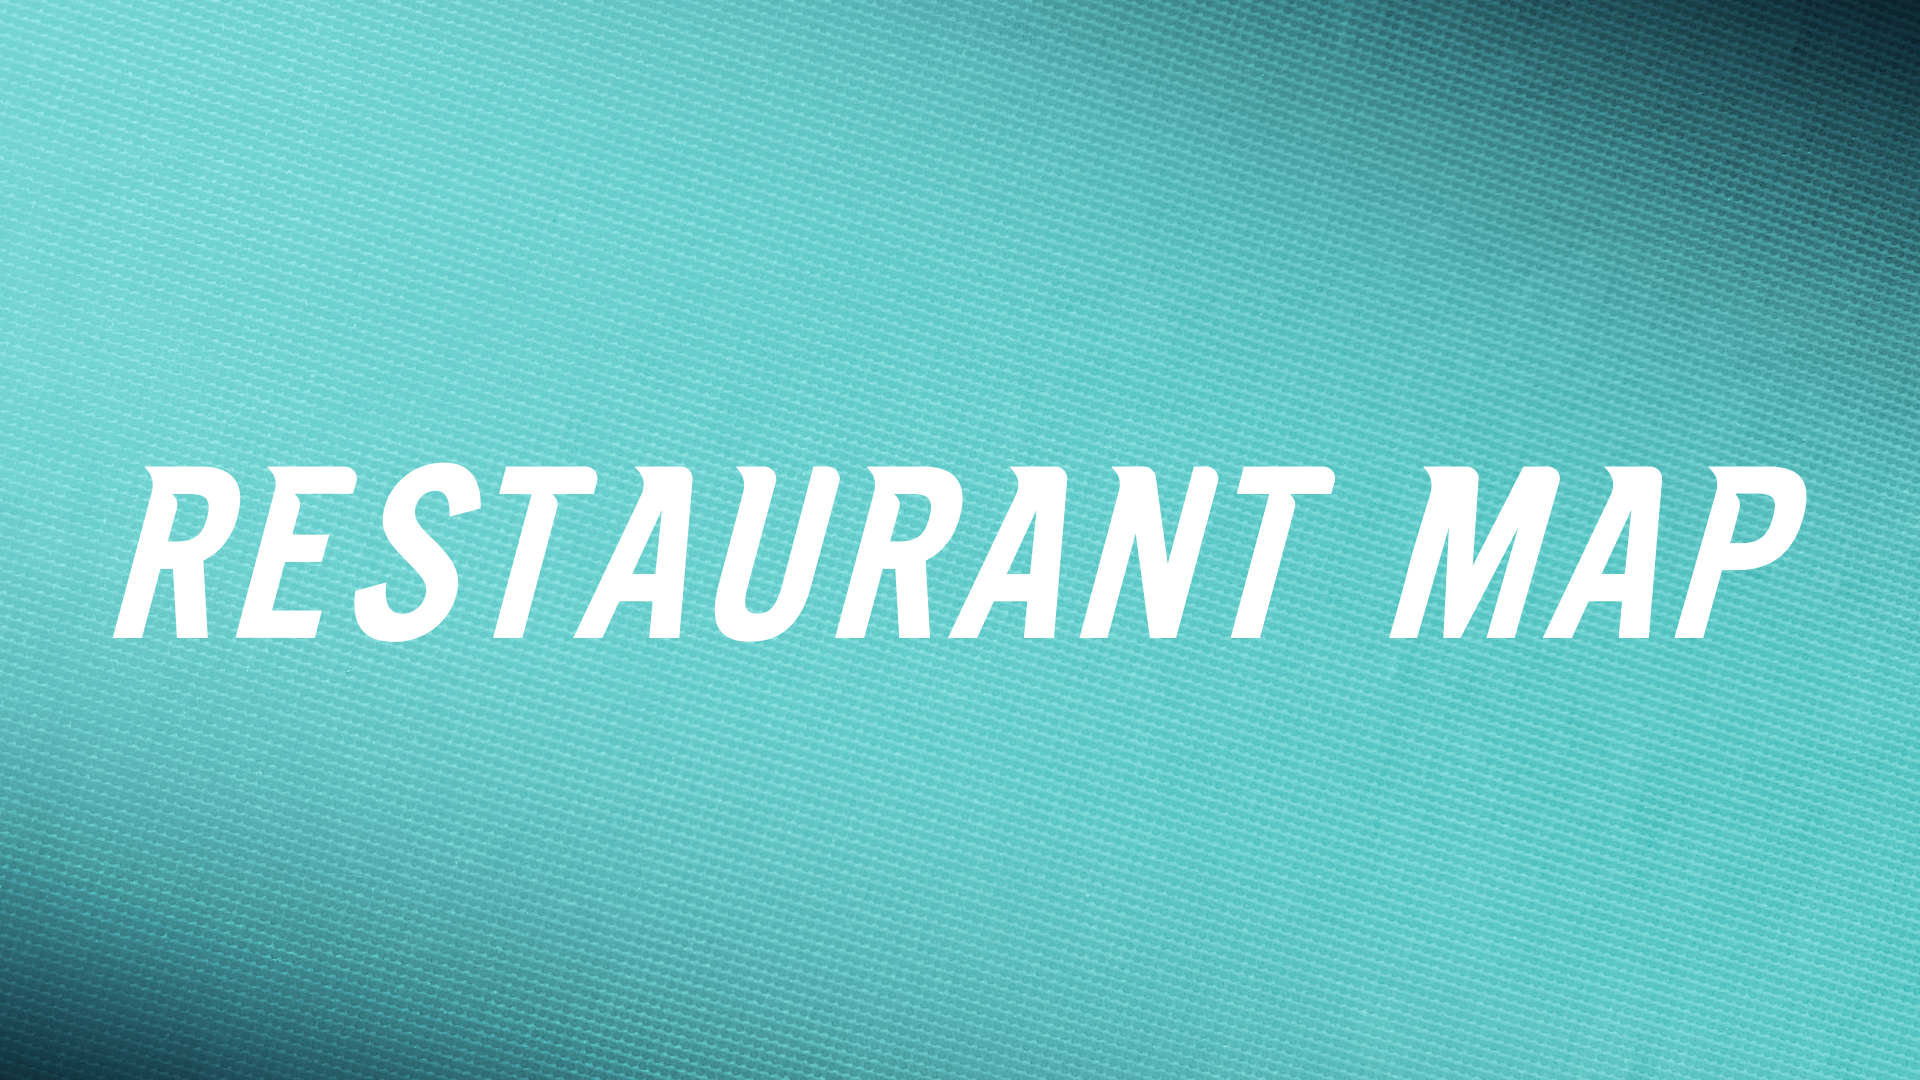 A graphic with the text "Restaurant Map" on a teal background.